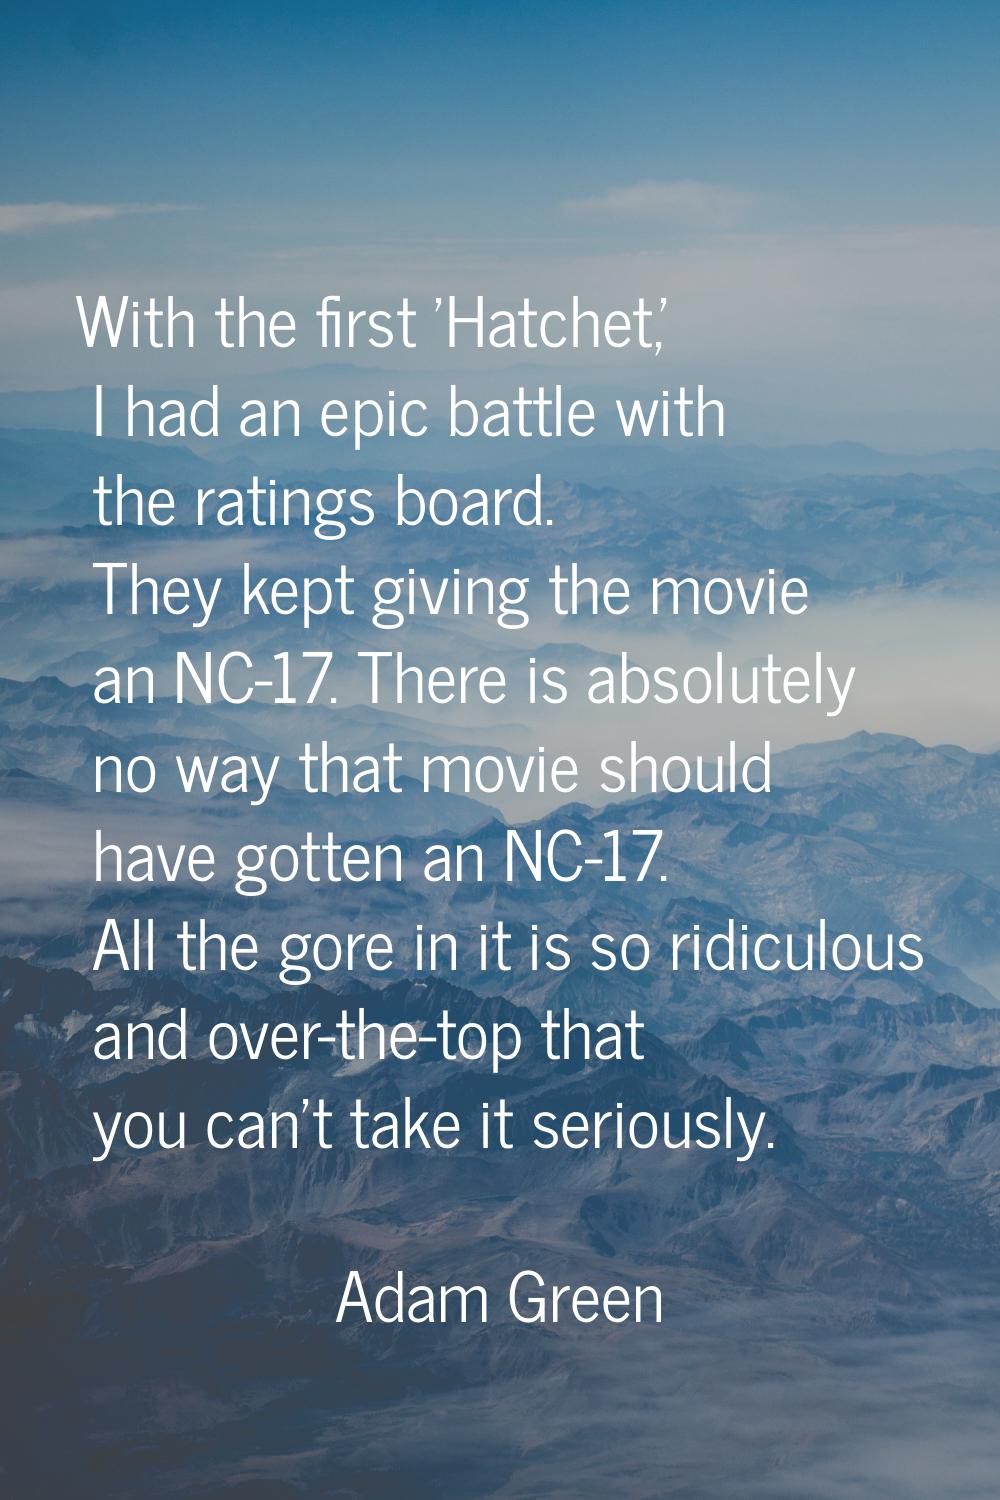 With the first 'Hatchet,' I had an epic battle with the ratings board. They kept giving the movie a